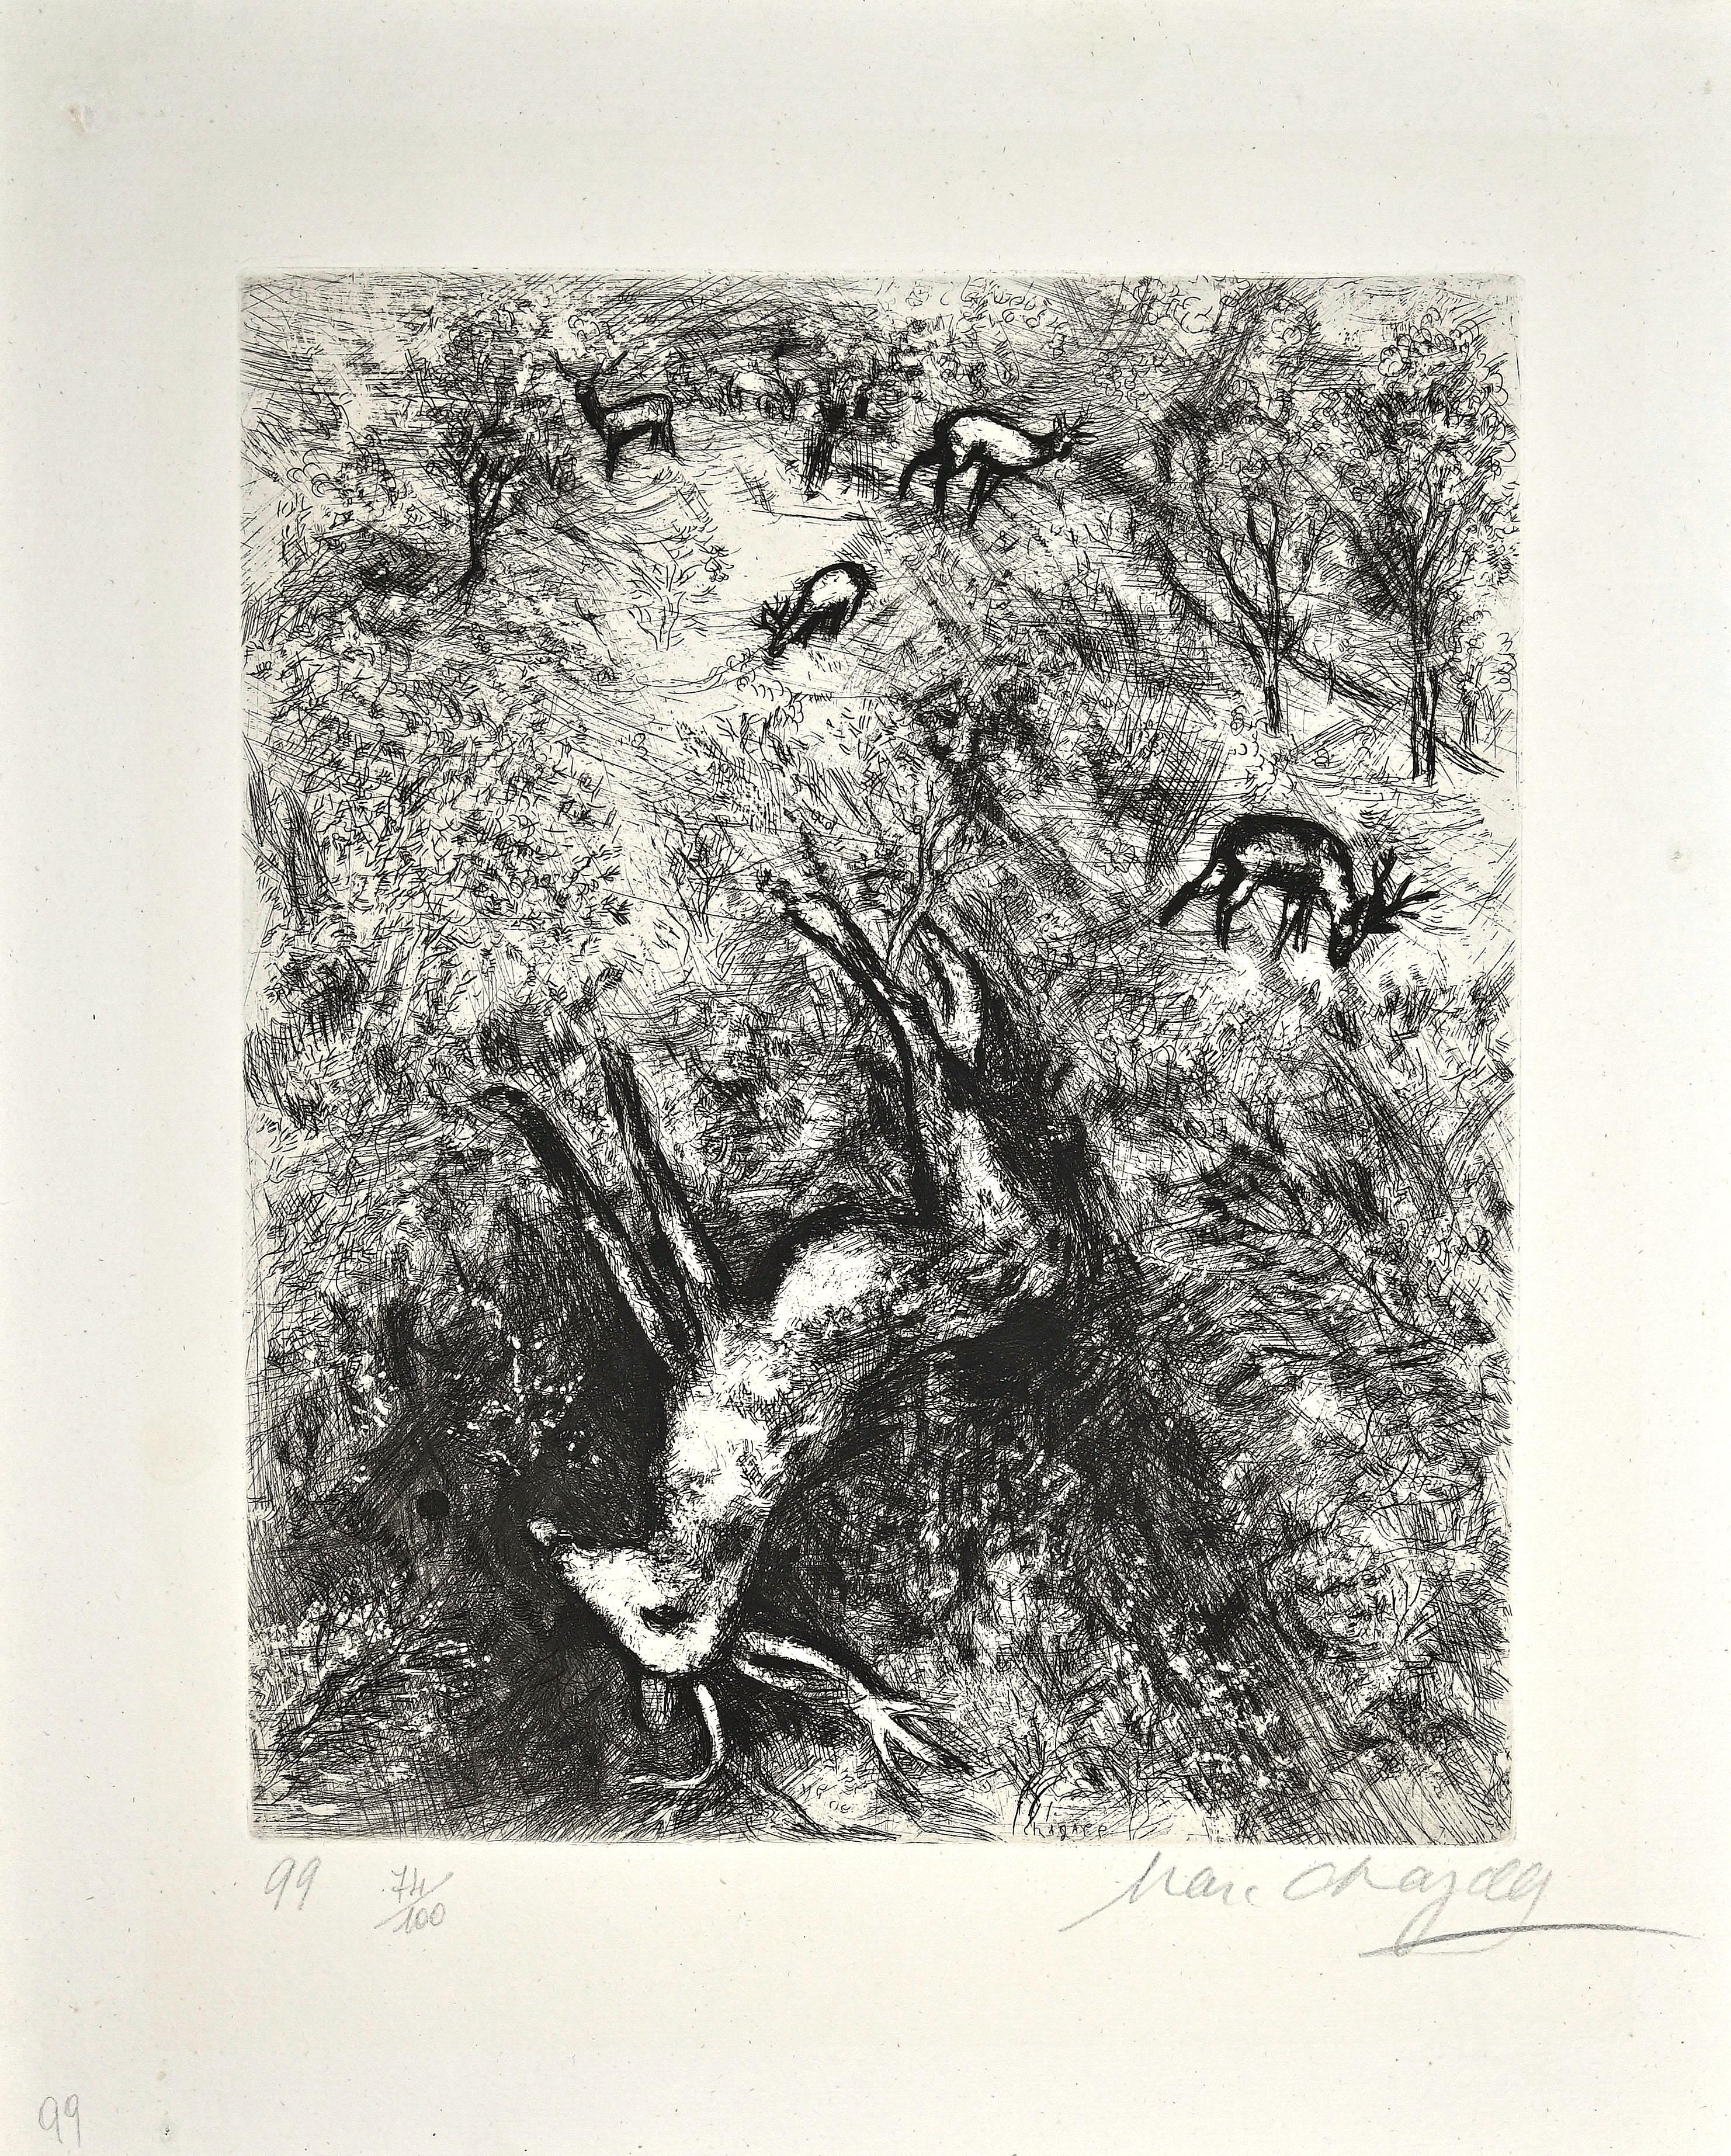 Beautiful etching from the series "Le Fables de La Fontaine", realized by Marc Chagall in 1927/30.

Hand Signed. Edition 74/100.

Engraved between 1927 and 1930, the "Fables" were printed and published by Ambrose Vollard, Paris.

Ref. Cramer 22;